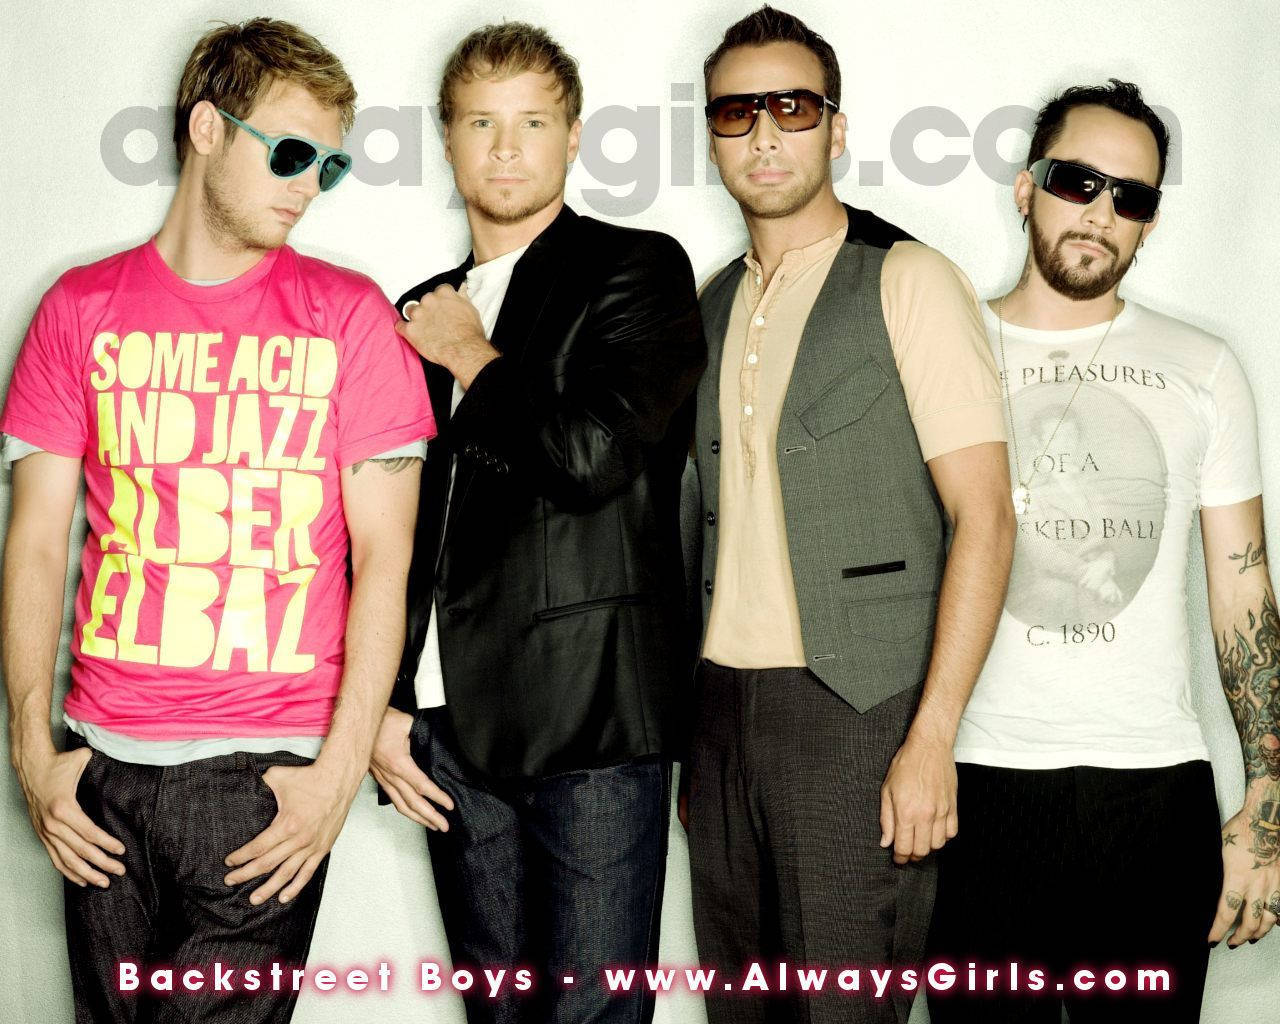 The Backstreet Boys On Stage, Looking Cool In Their Sunglasses! Background